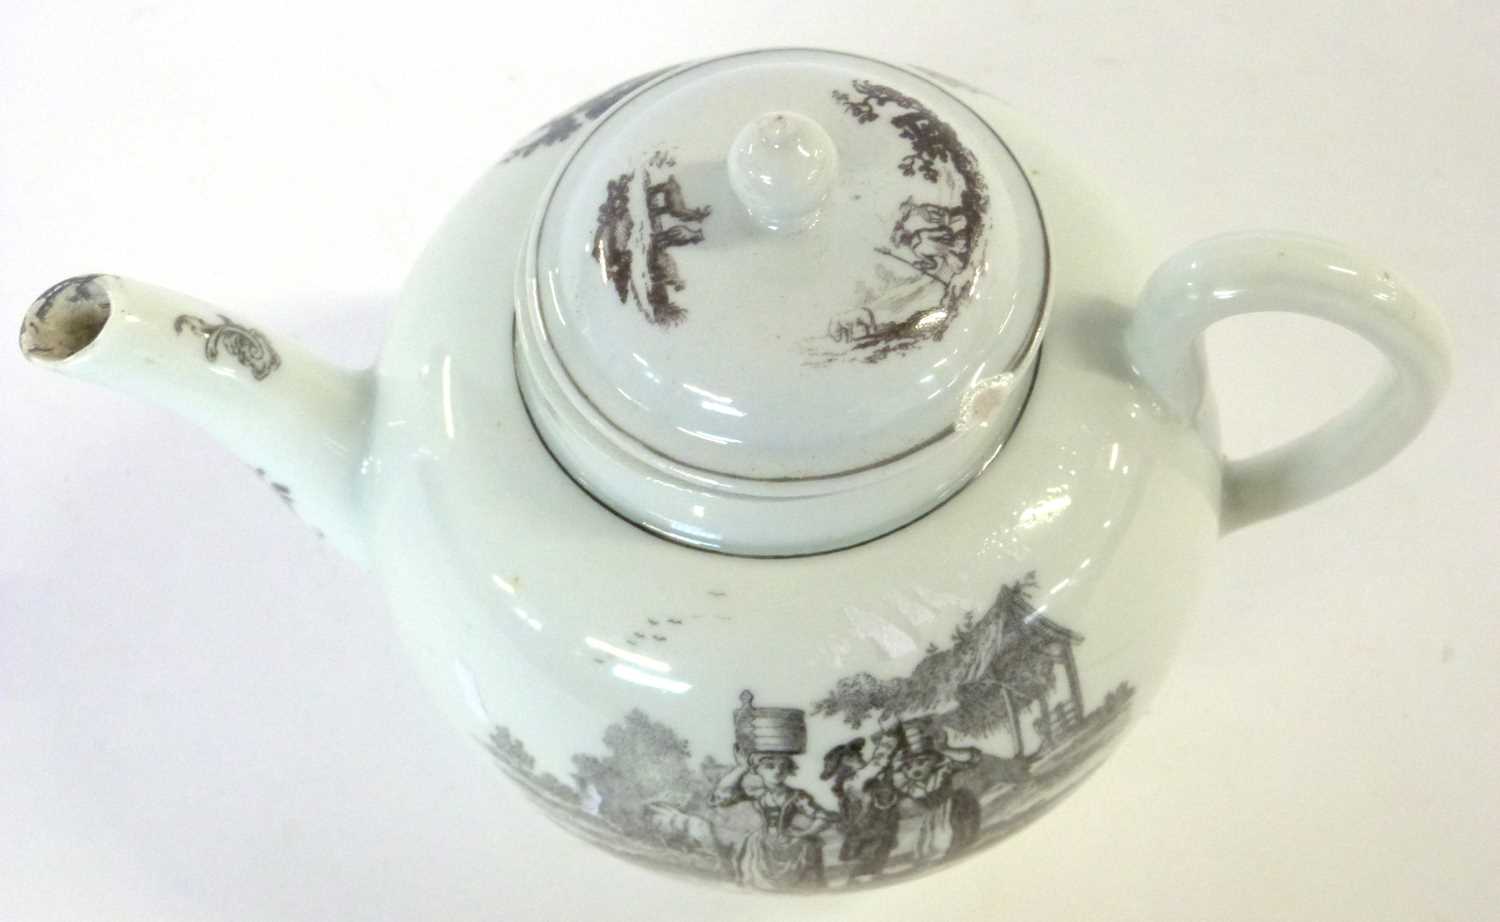 A 18th Century Worcester porcelain teapot decorated with prints of Milkmaids and pastoral scenes - Image 3 of 4